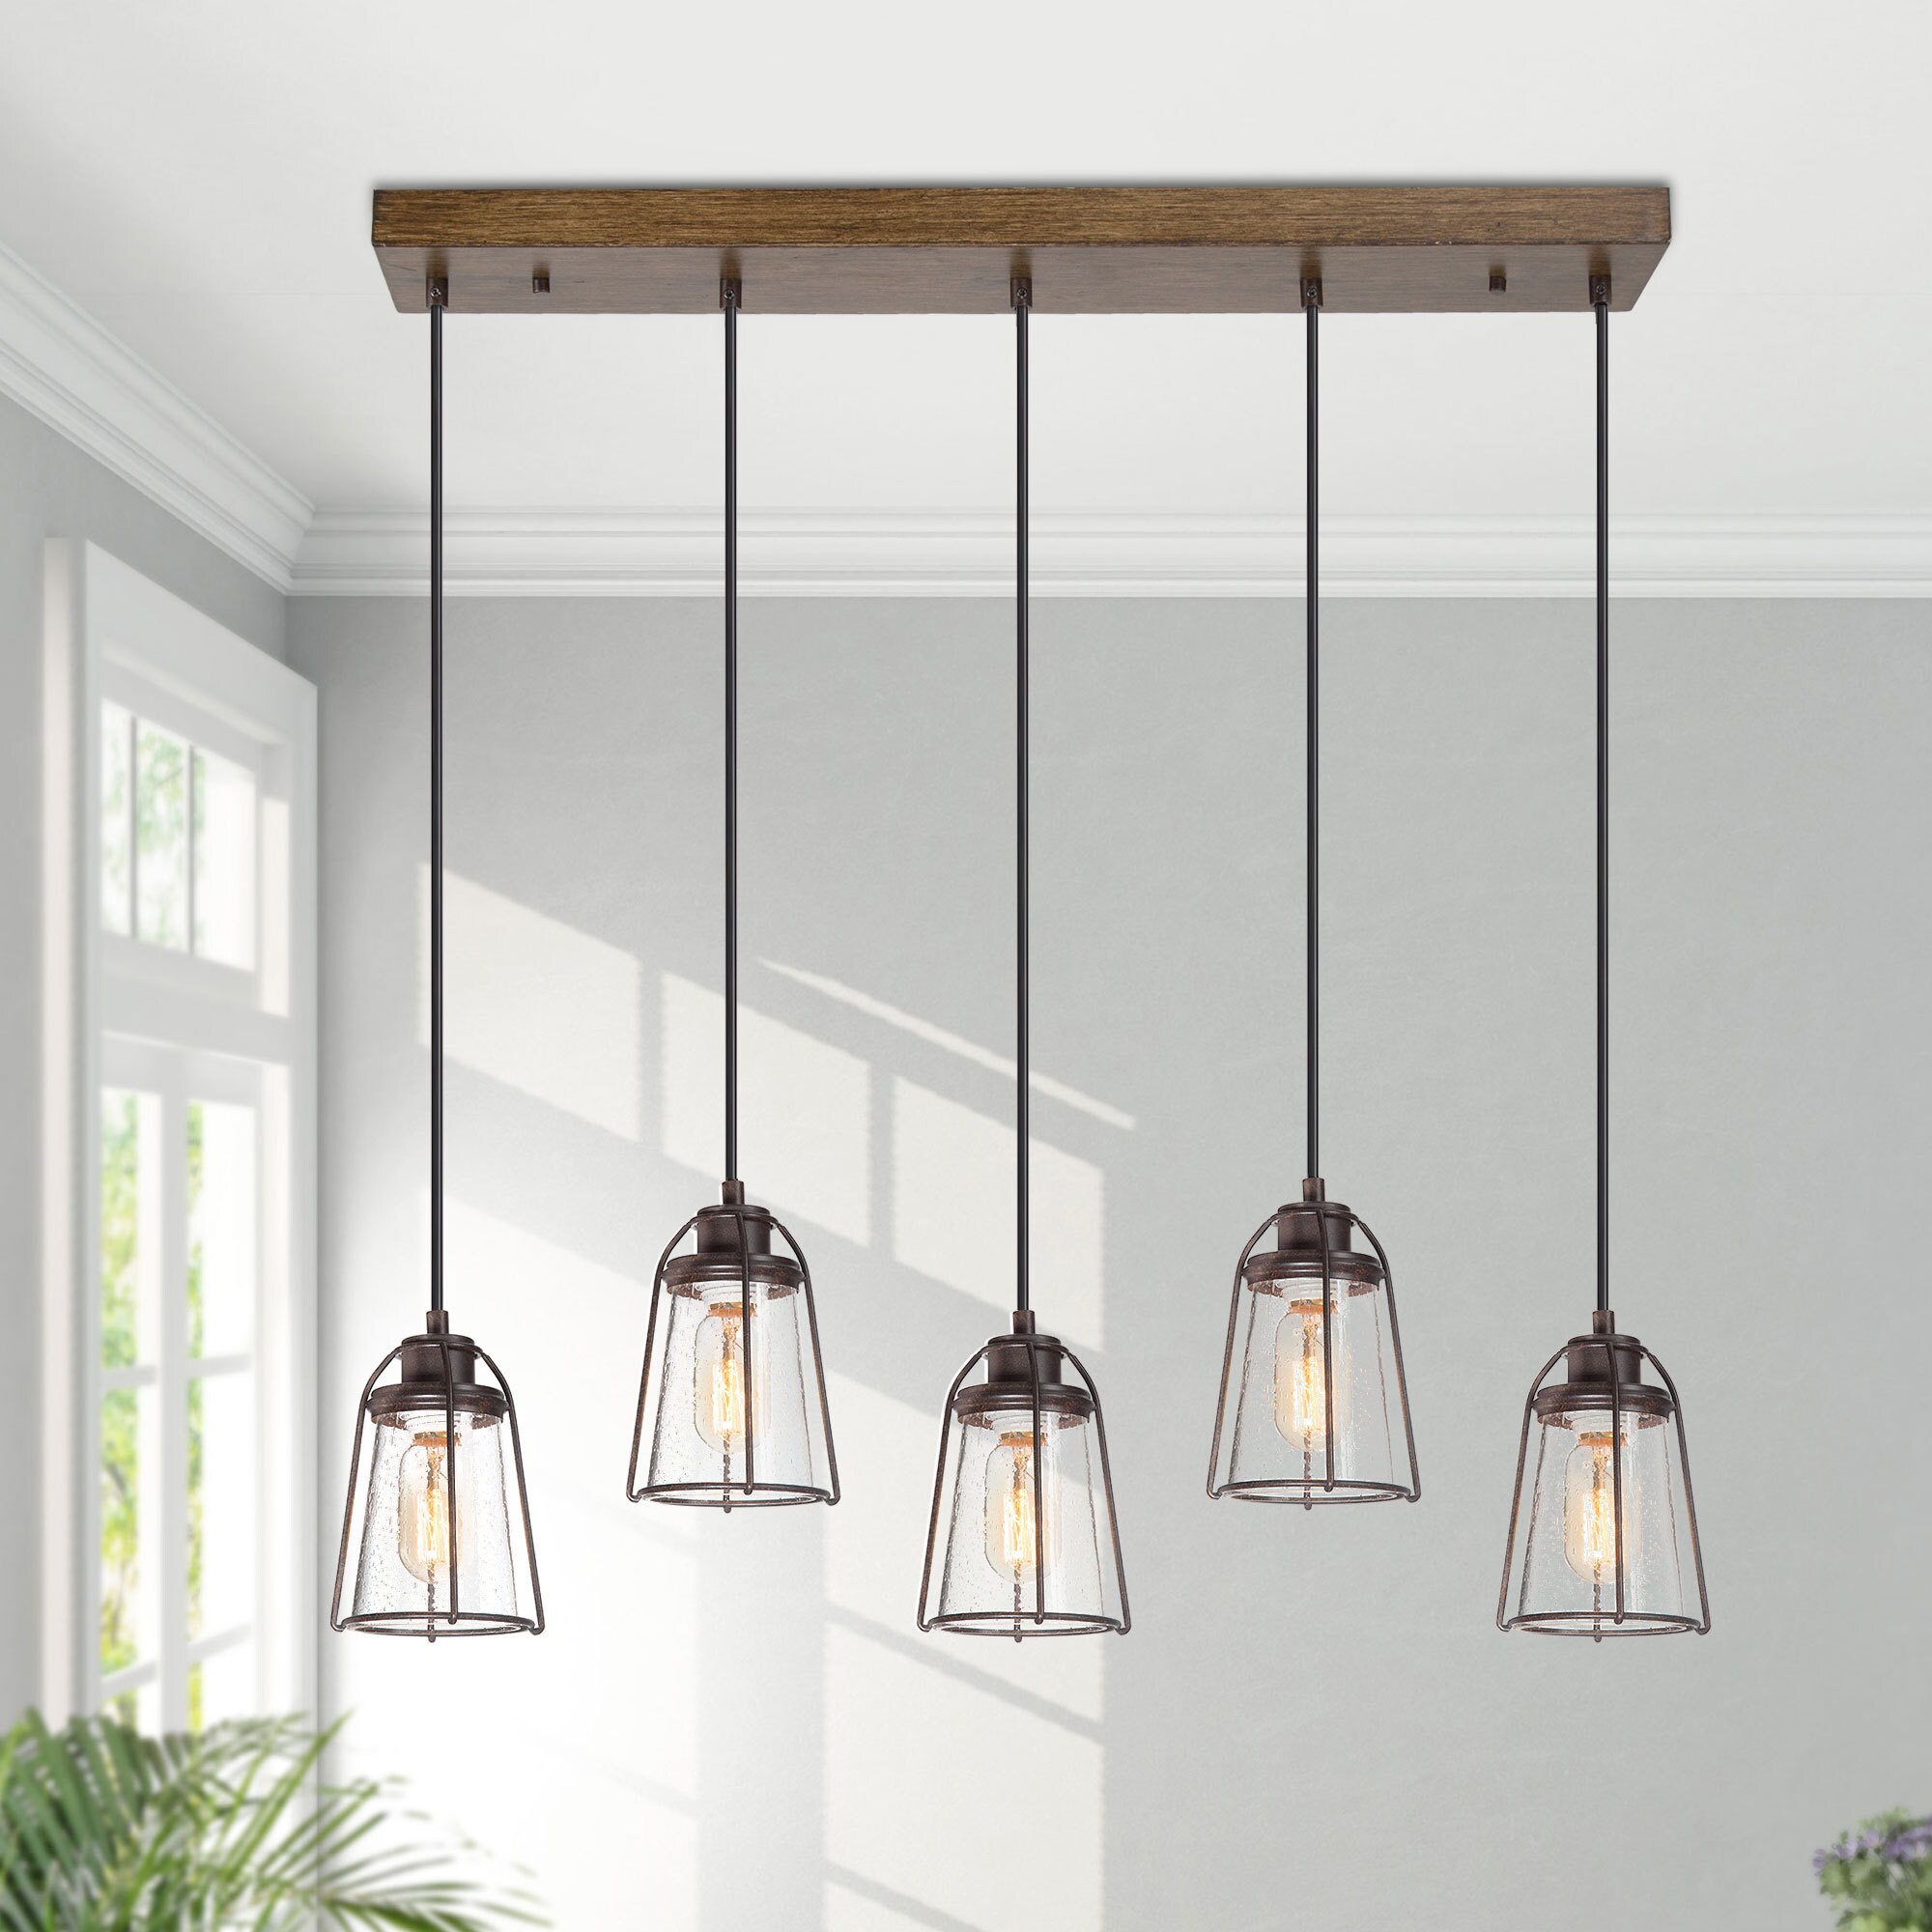 12 Inch Light Pull Chains Extension Bronze with Wood Knob Pendant  Ceiling Lamp 